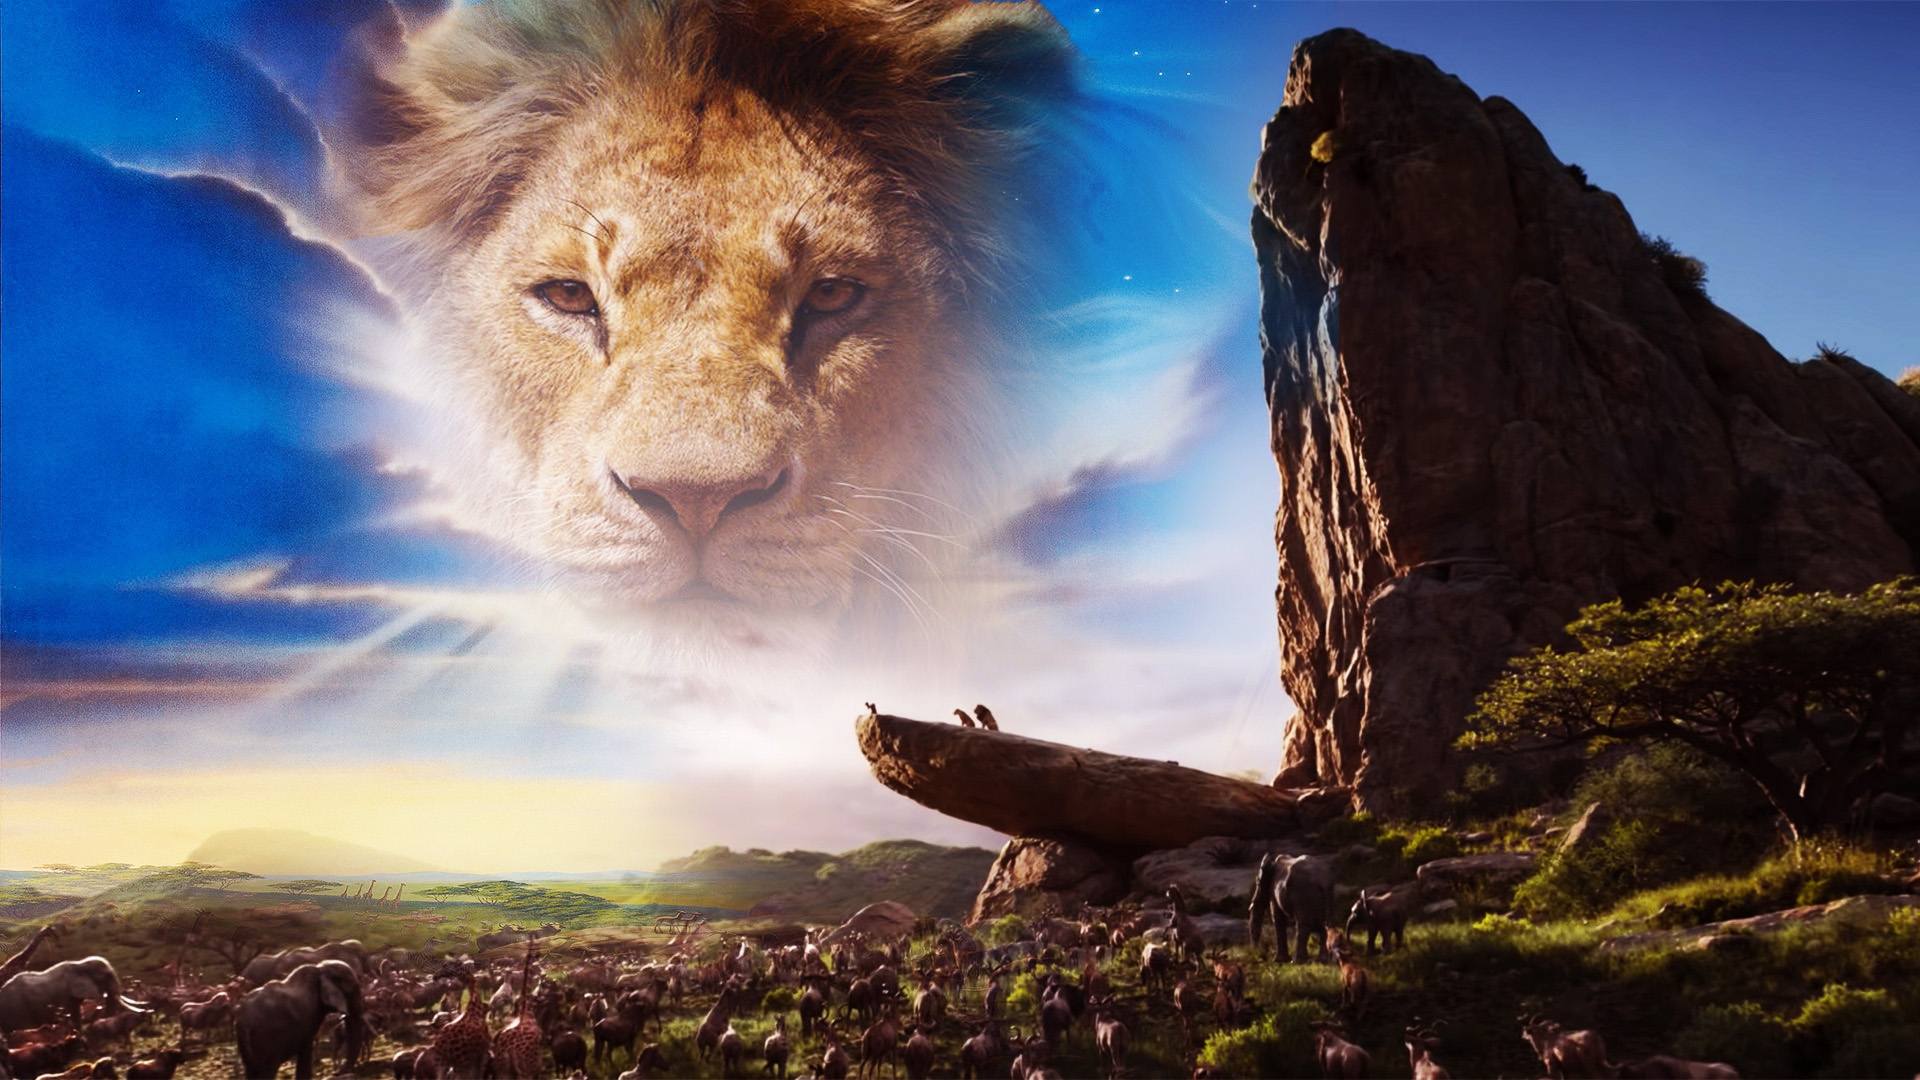 The Lion King 19 Wallpaper By Thekingblader995 On Deviantart